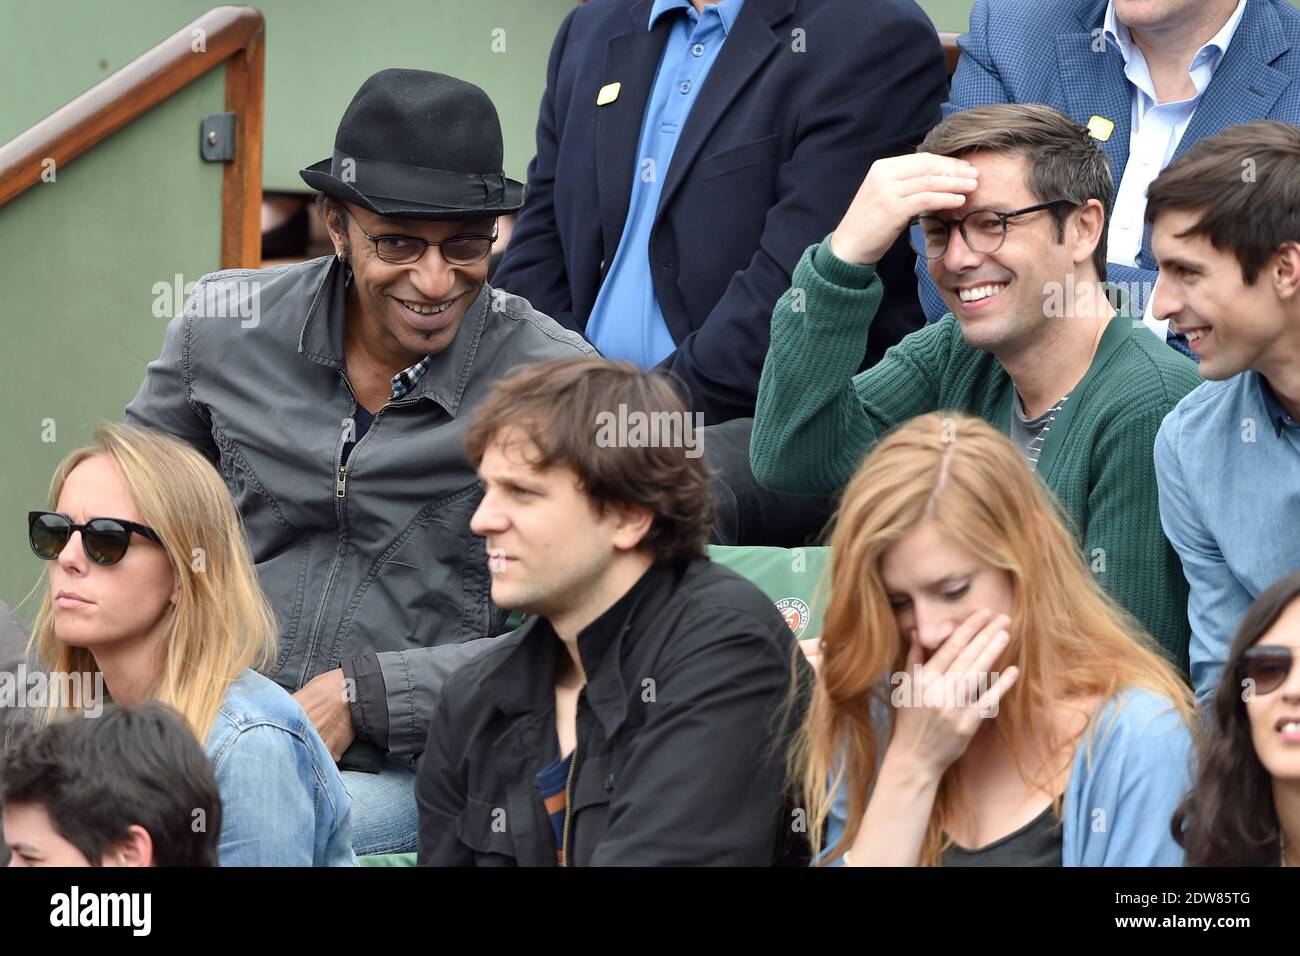 Manu Katche and Stephane Jarny watching a game during the French Tennis  Open at Roland Garros arena in Paris, France, on June 1, 2014. Photo by  Nicolas Gouhier/ABACAPRESS.COM Stock Photo - Alamy